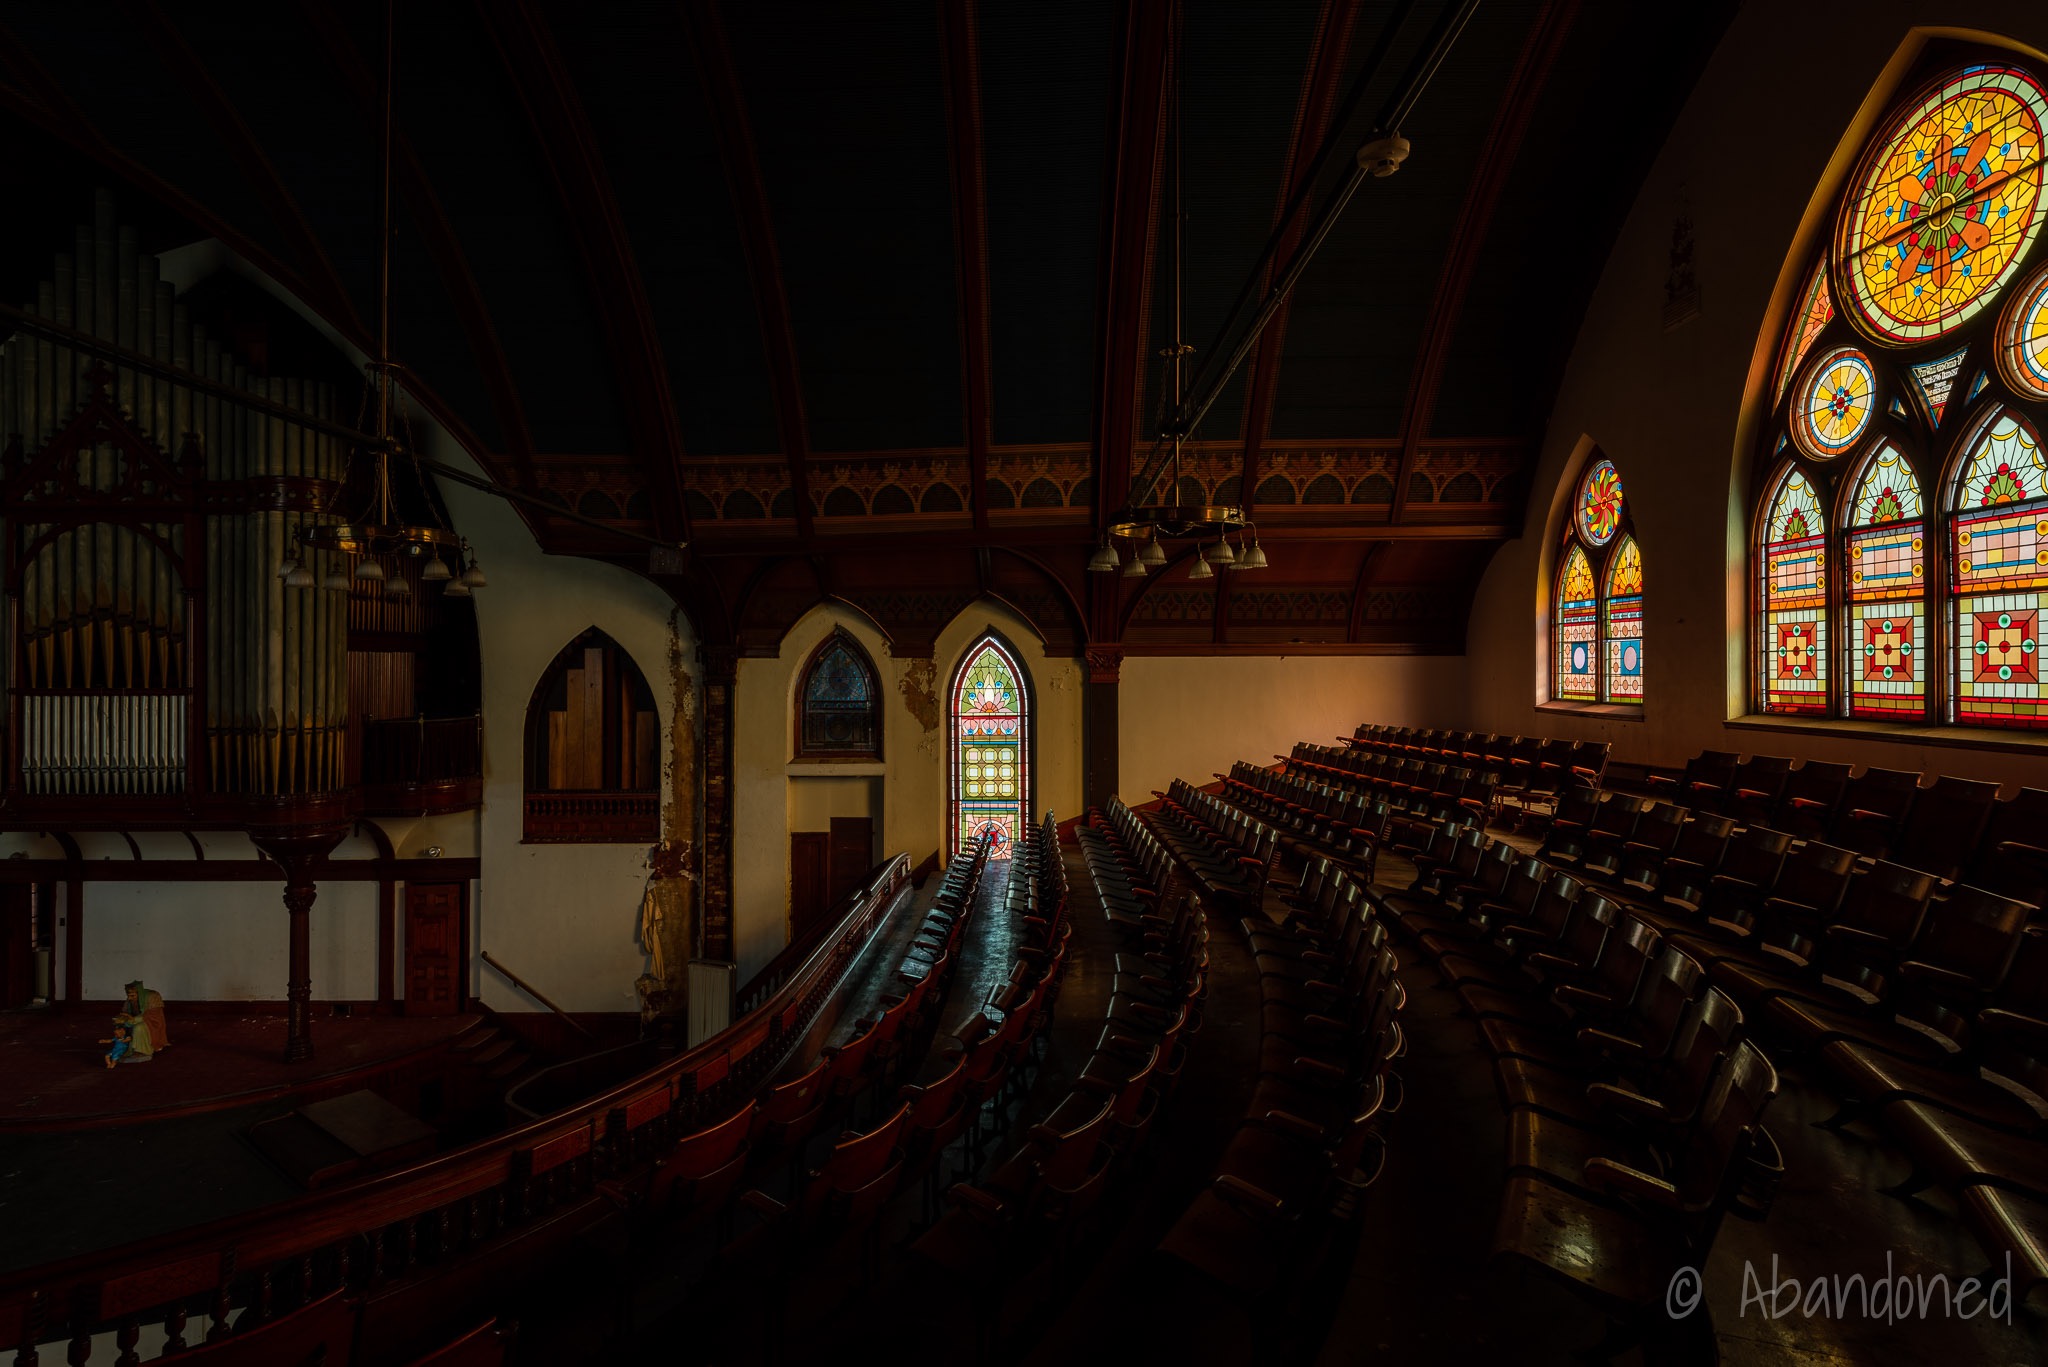 Sanctuary with Stained Glass